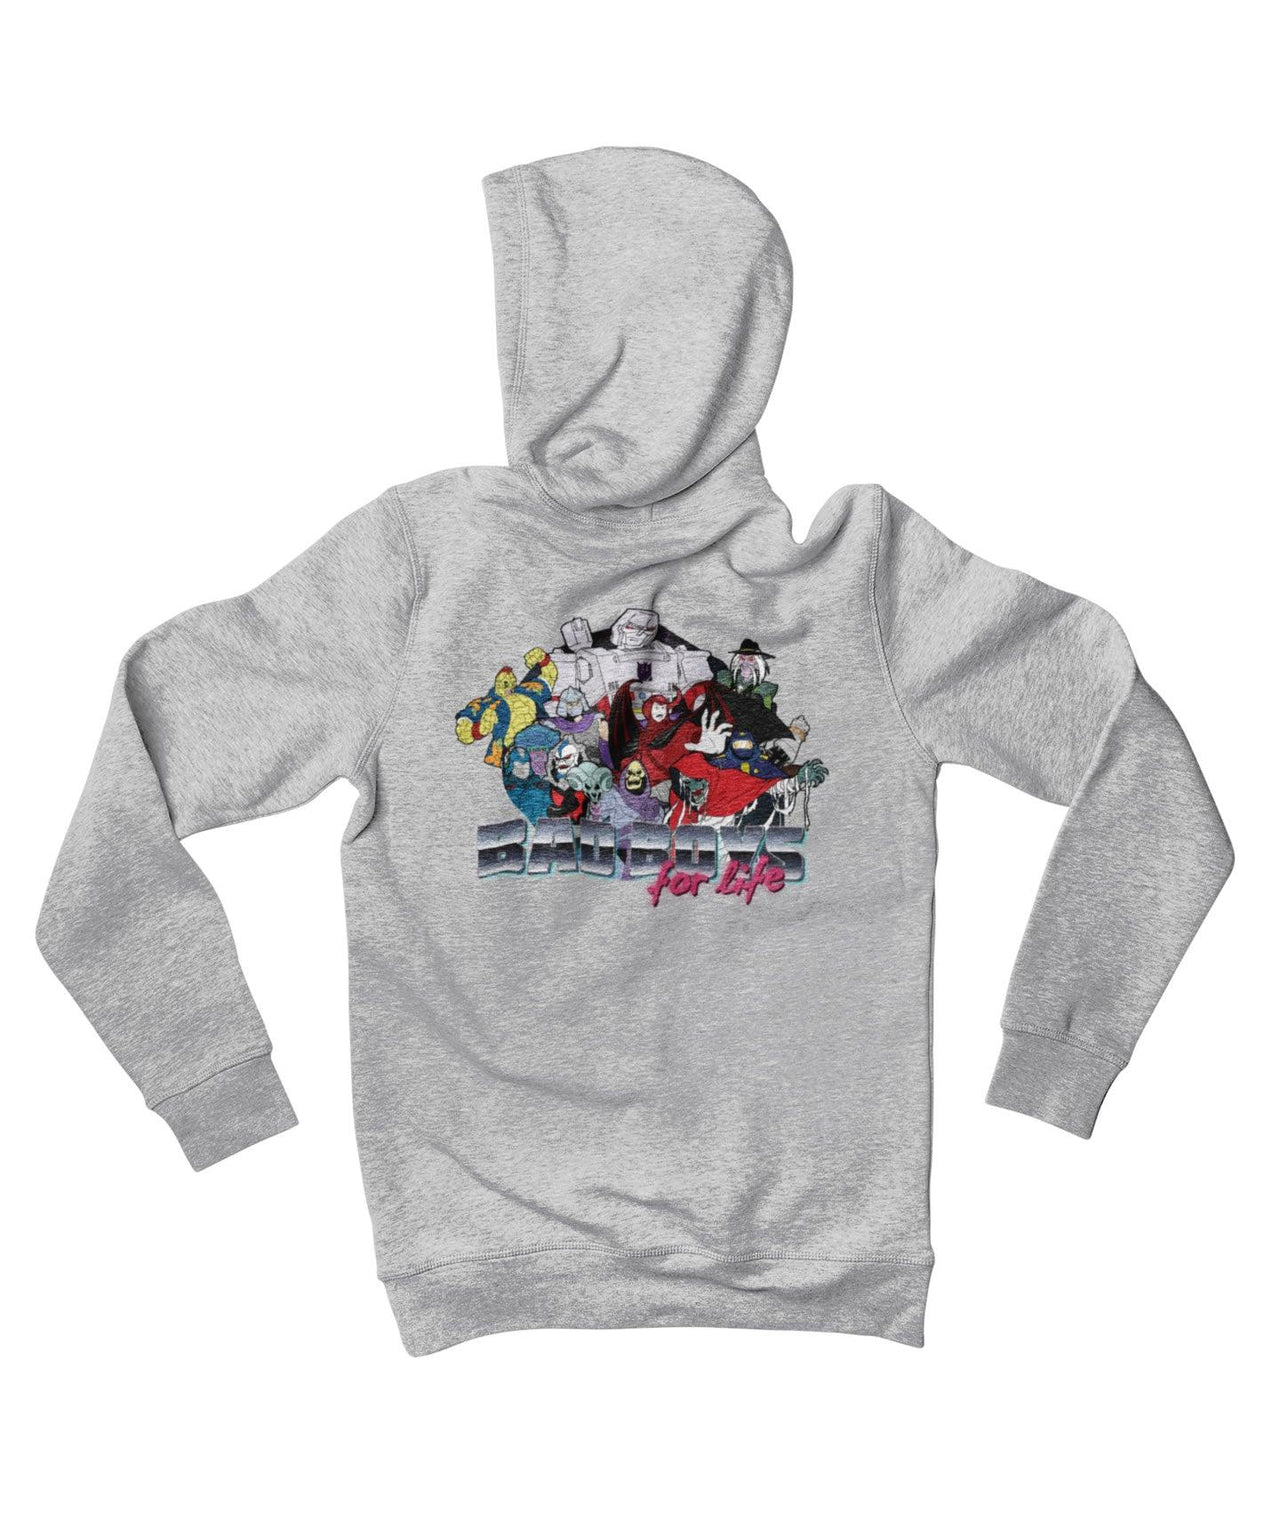 Top Notchy Bad Boys For Life Back Printed Hoodie For Men and Women 8Ball